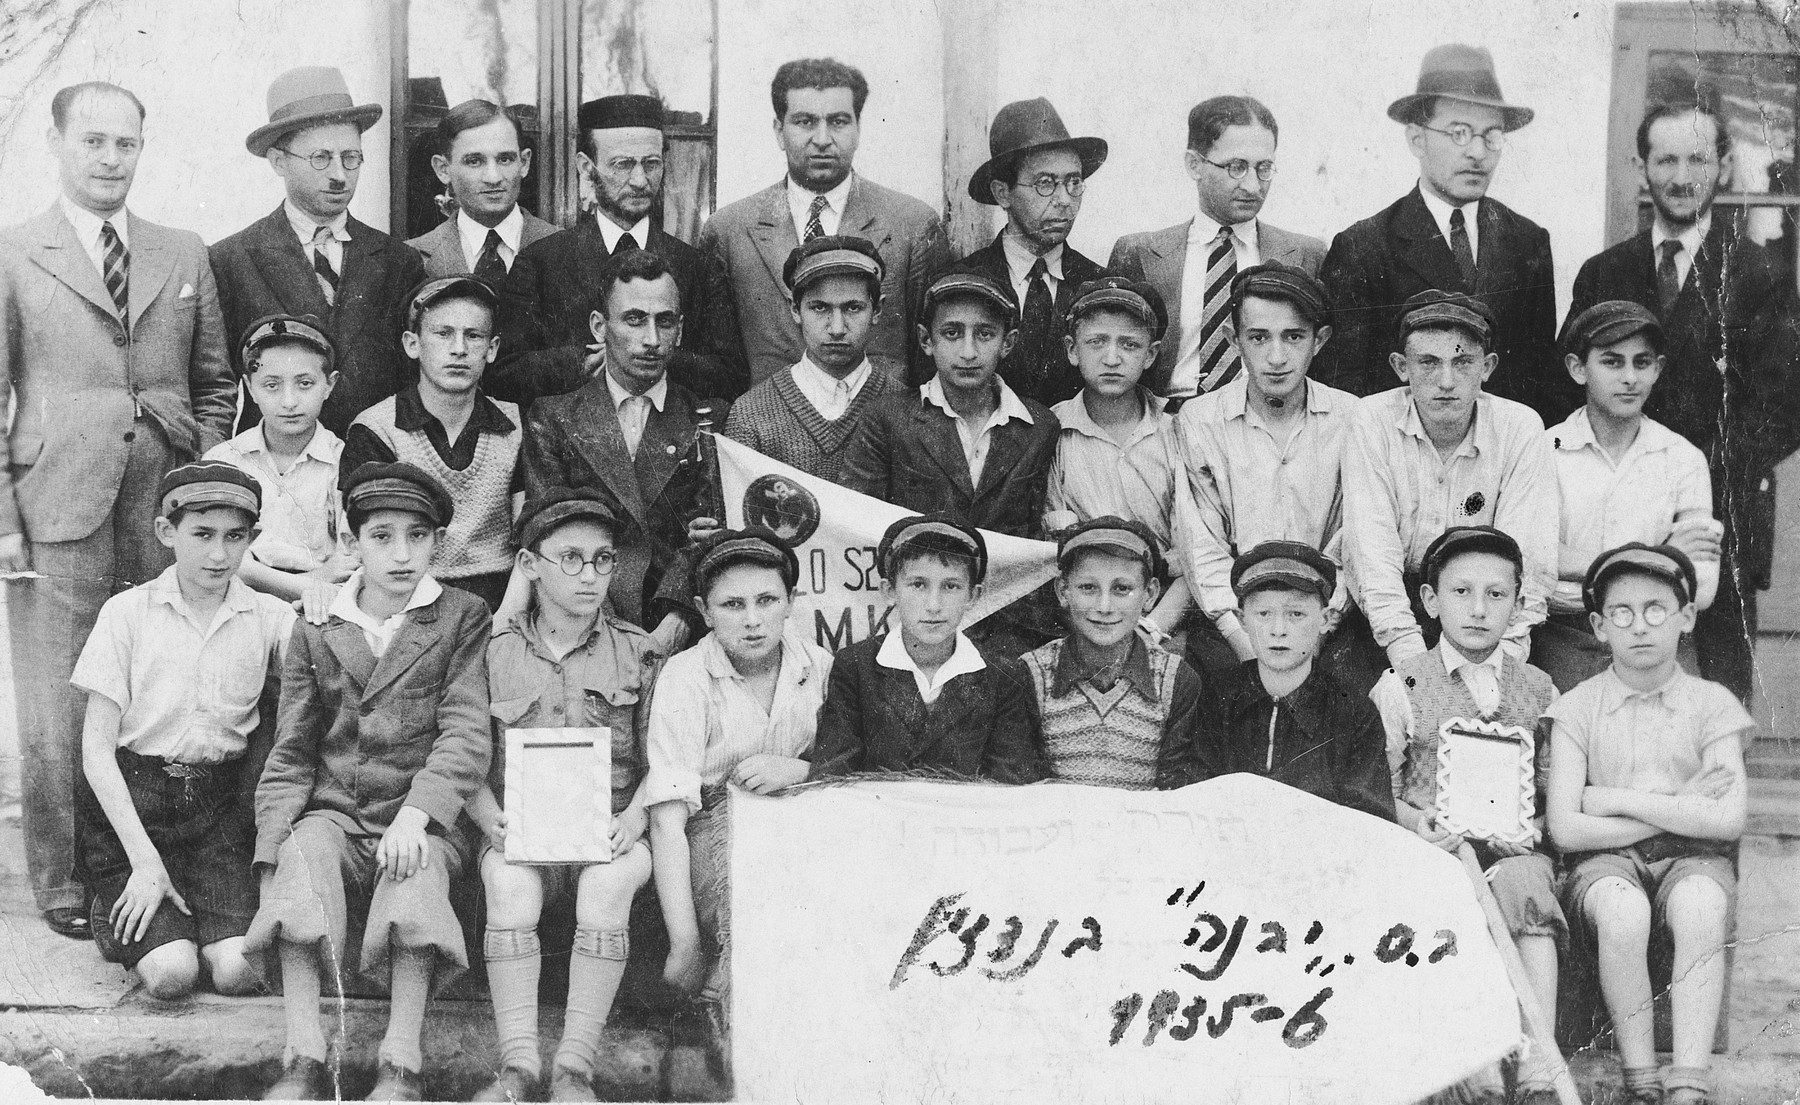 Group portrait of faculty and students of the Yavne Hebrew elementary school in Bedzin, Poland.

Among those pictured is Moniek Szeps (front row, second from the right) holding a framed portrait of the Polish president.  The inscription on the back of the photo reads, "As a memento to dear Moniek wishing that you will visit often your Mizrachi teacher, Euteniusz Pejsachowicz."  It is followed by a list of student signatures: H. Przymowski, M. Lustiger, Ksylek Hinigman, Moniek Radzynski, Olek Maka, H. Rechnic, M. Rechnic, Braun.